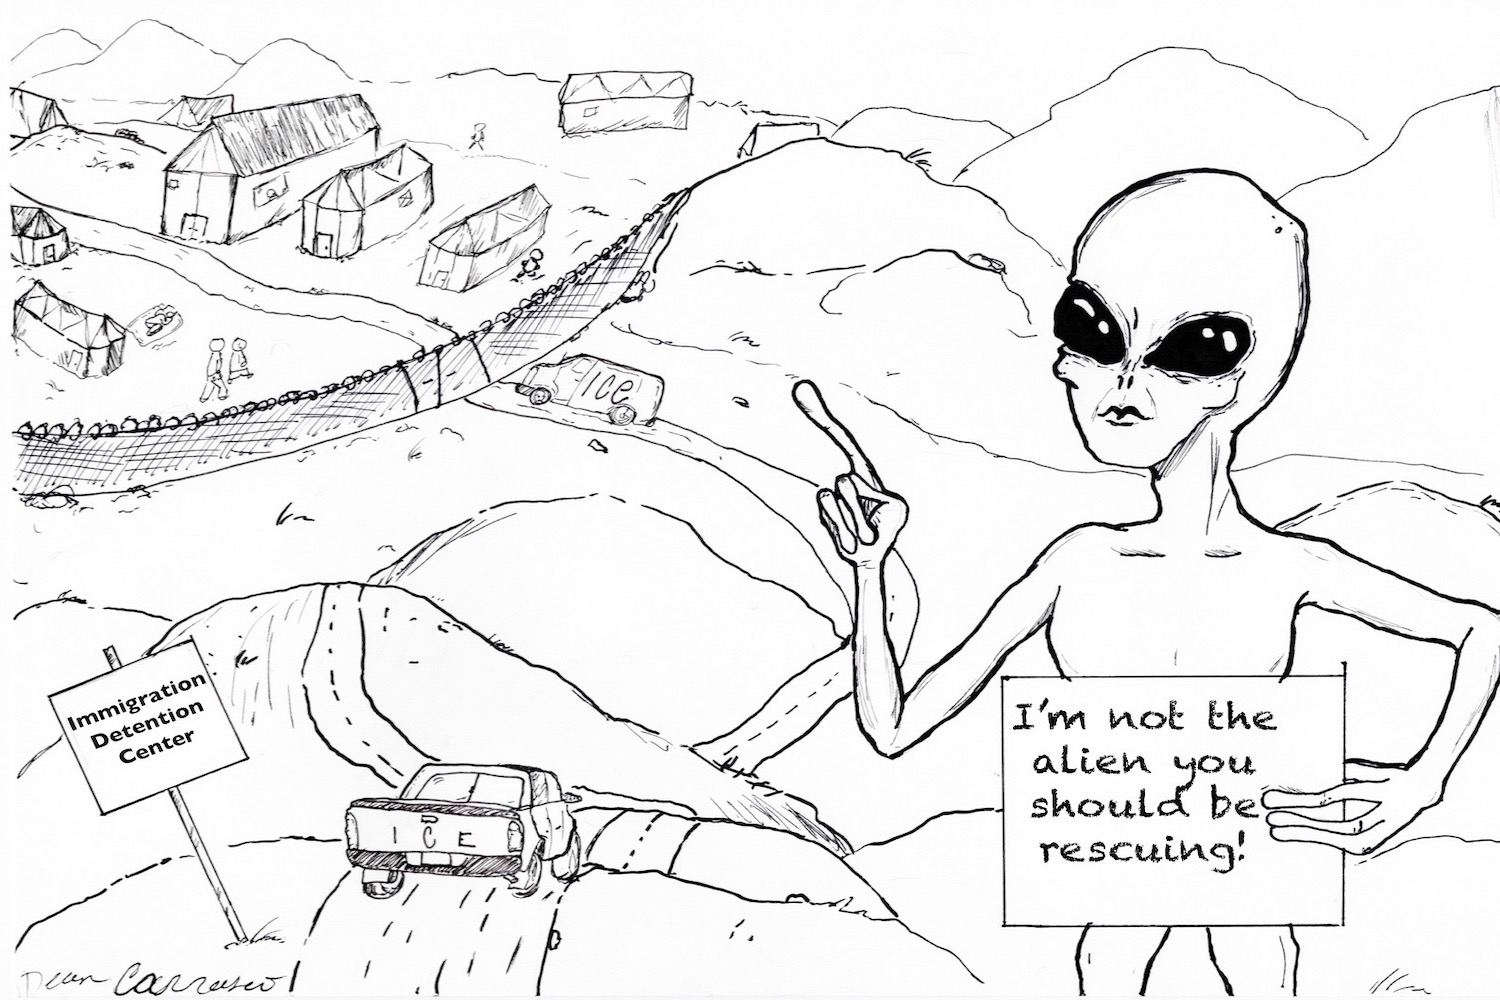 Aliens arent only at Area 51